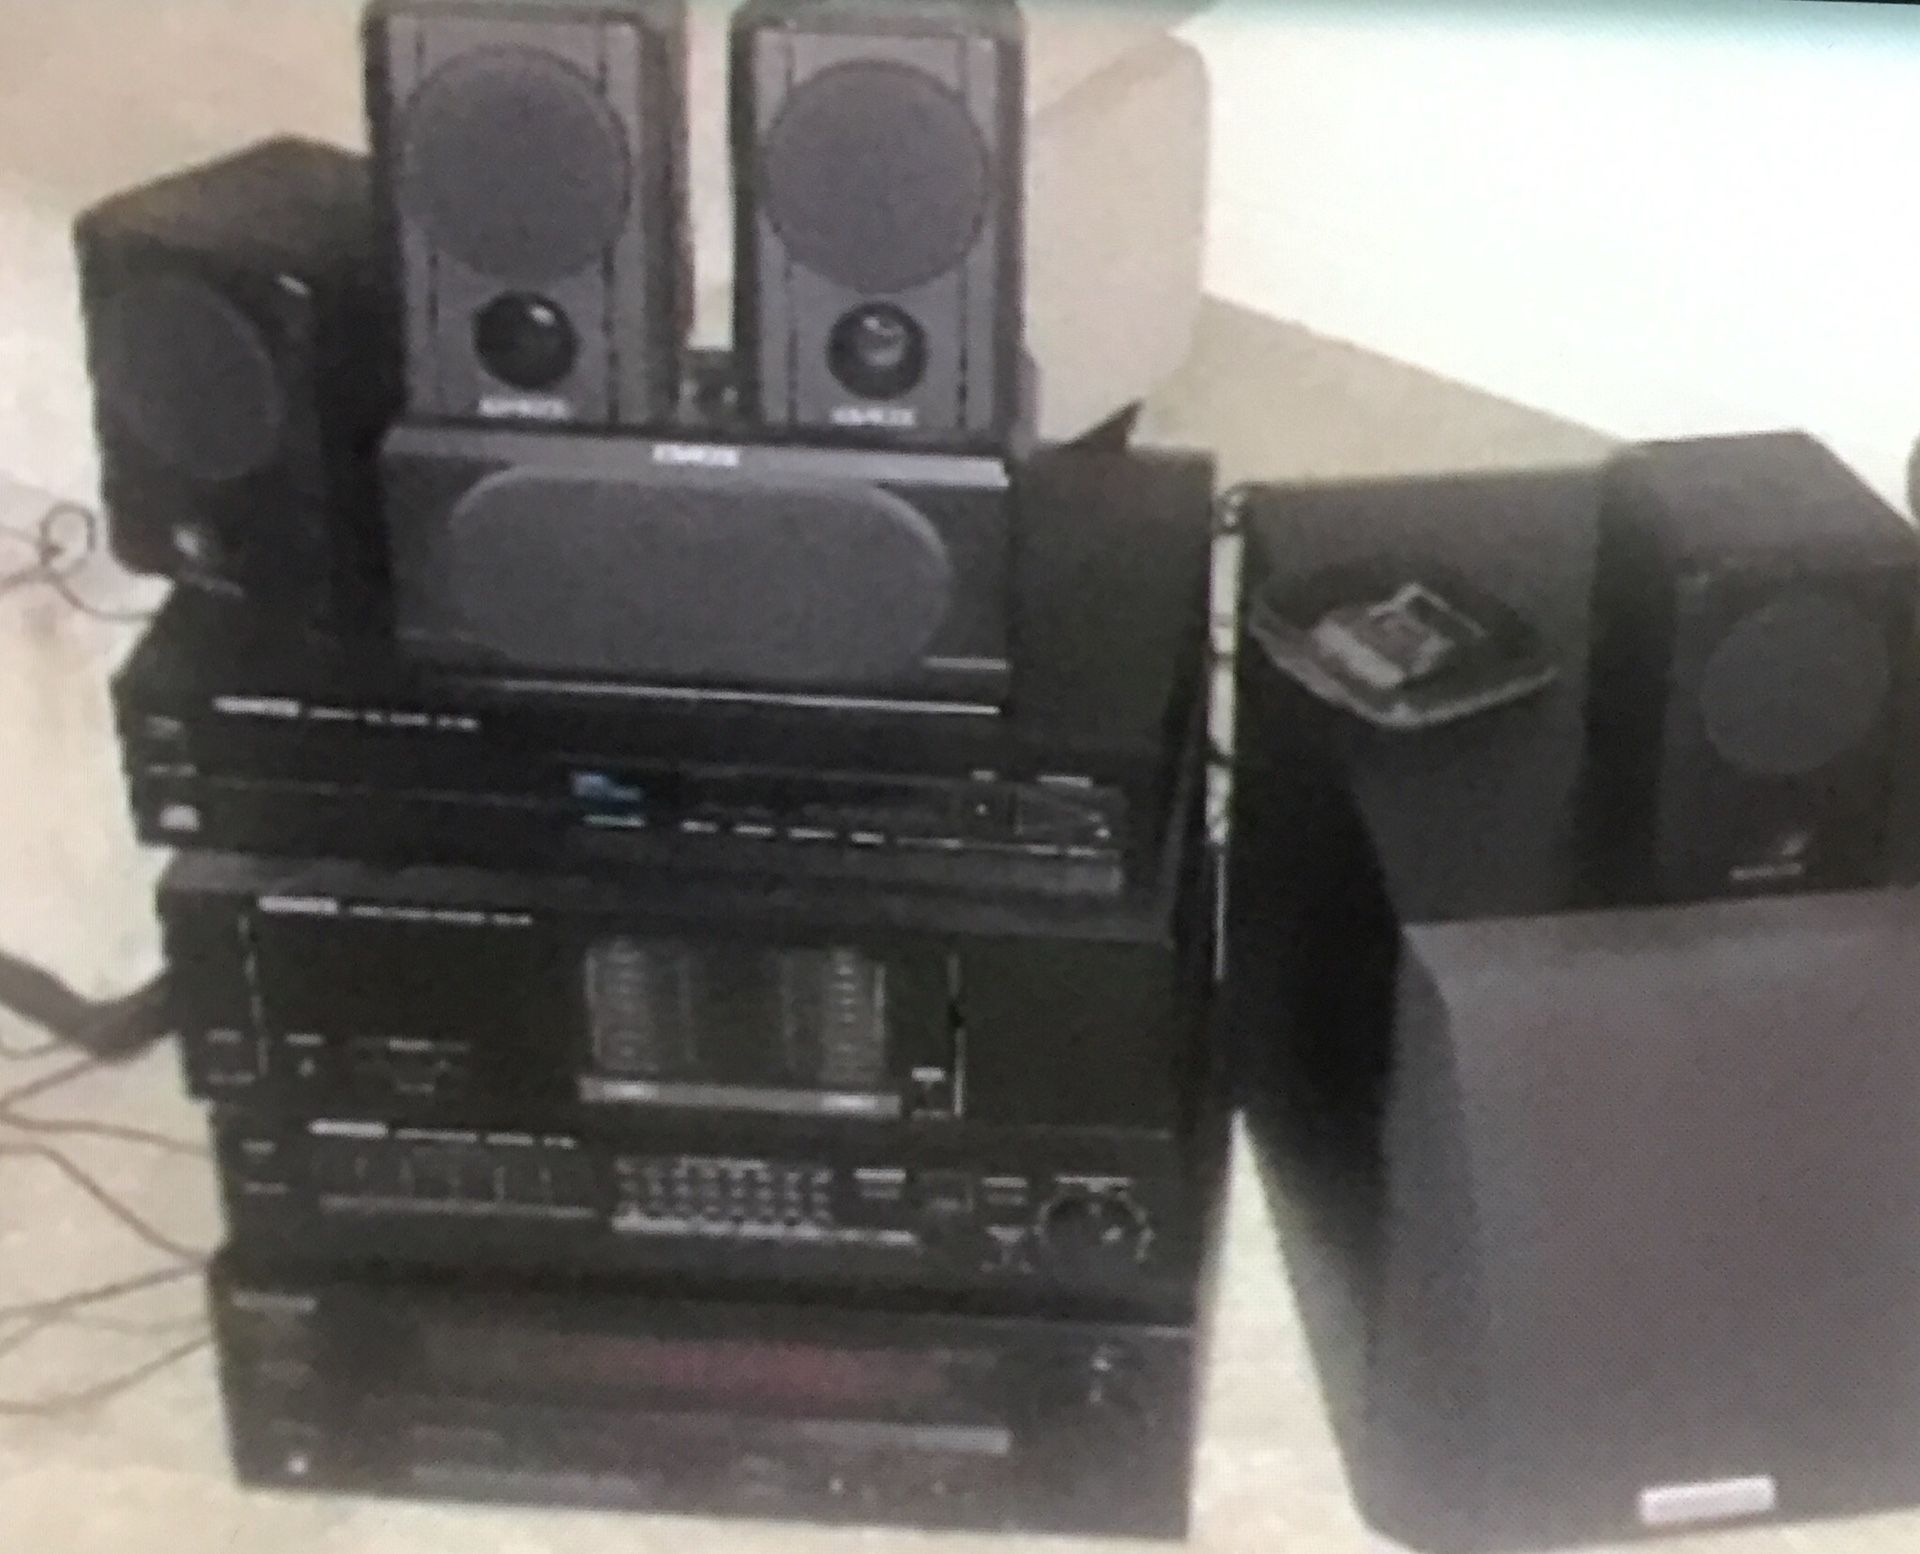 Kenwood Stereo System $125